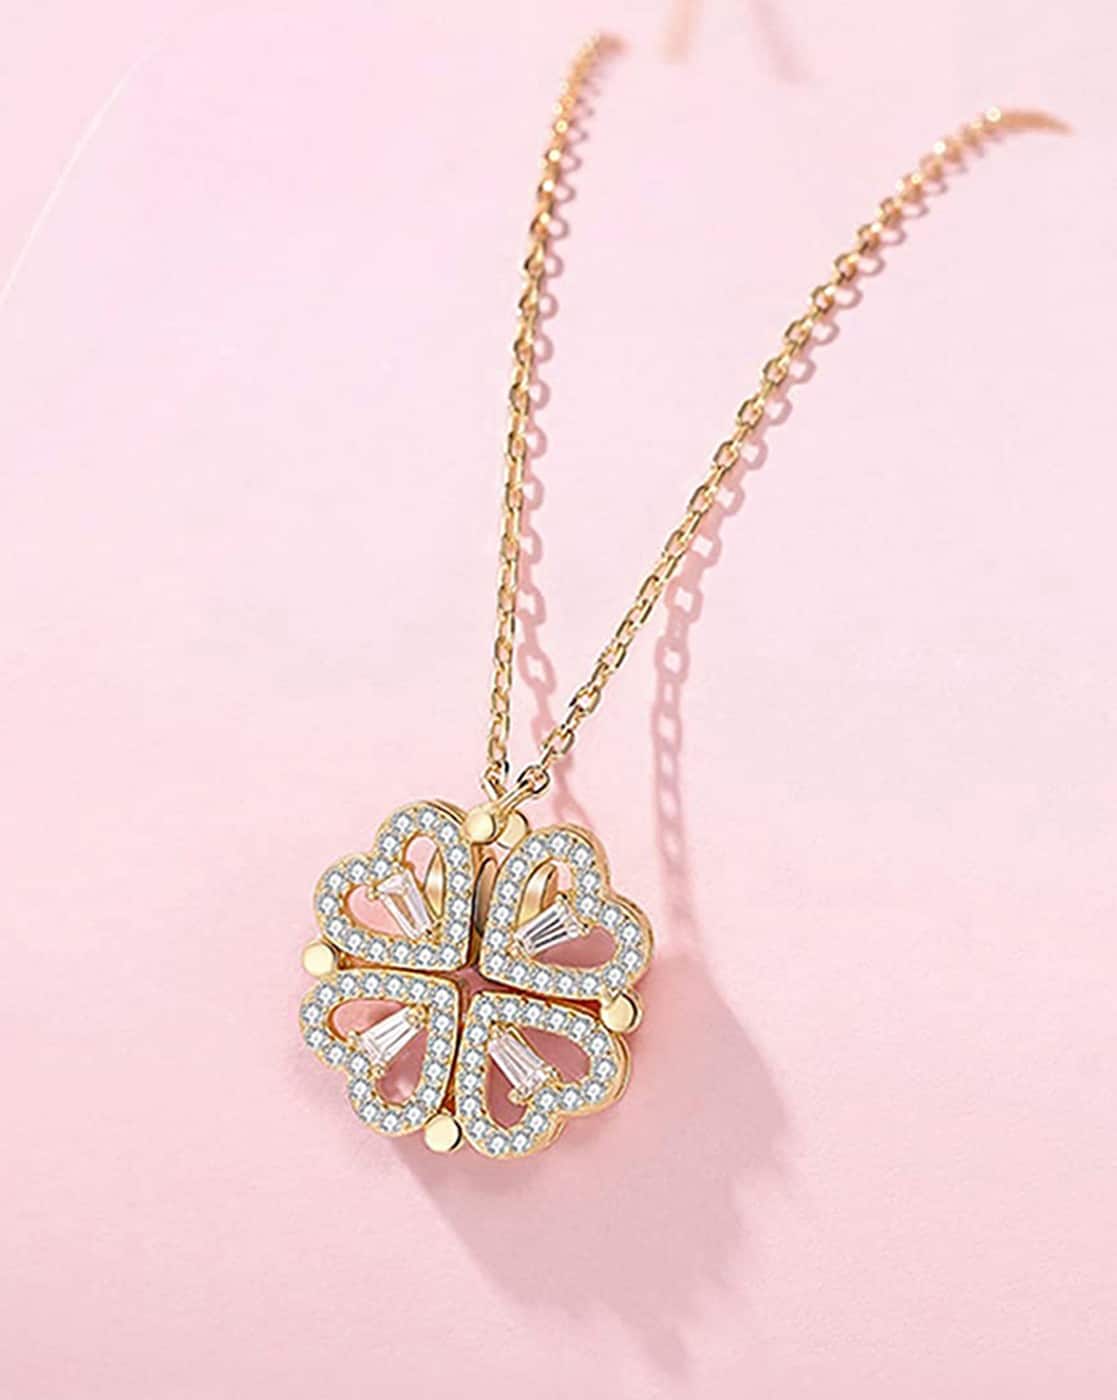 Pearl Clover Pendant (Gold)